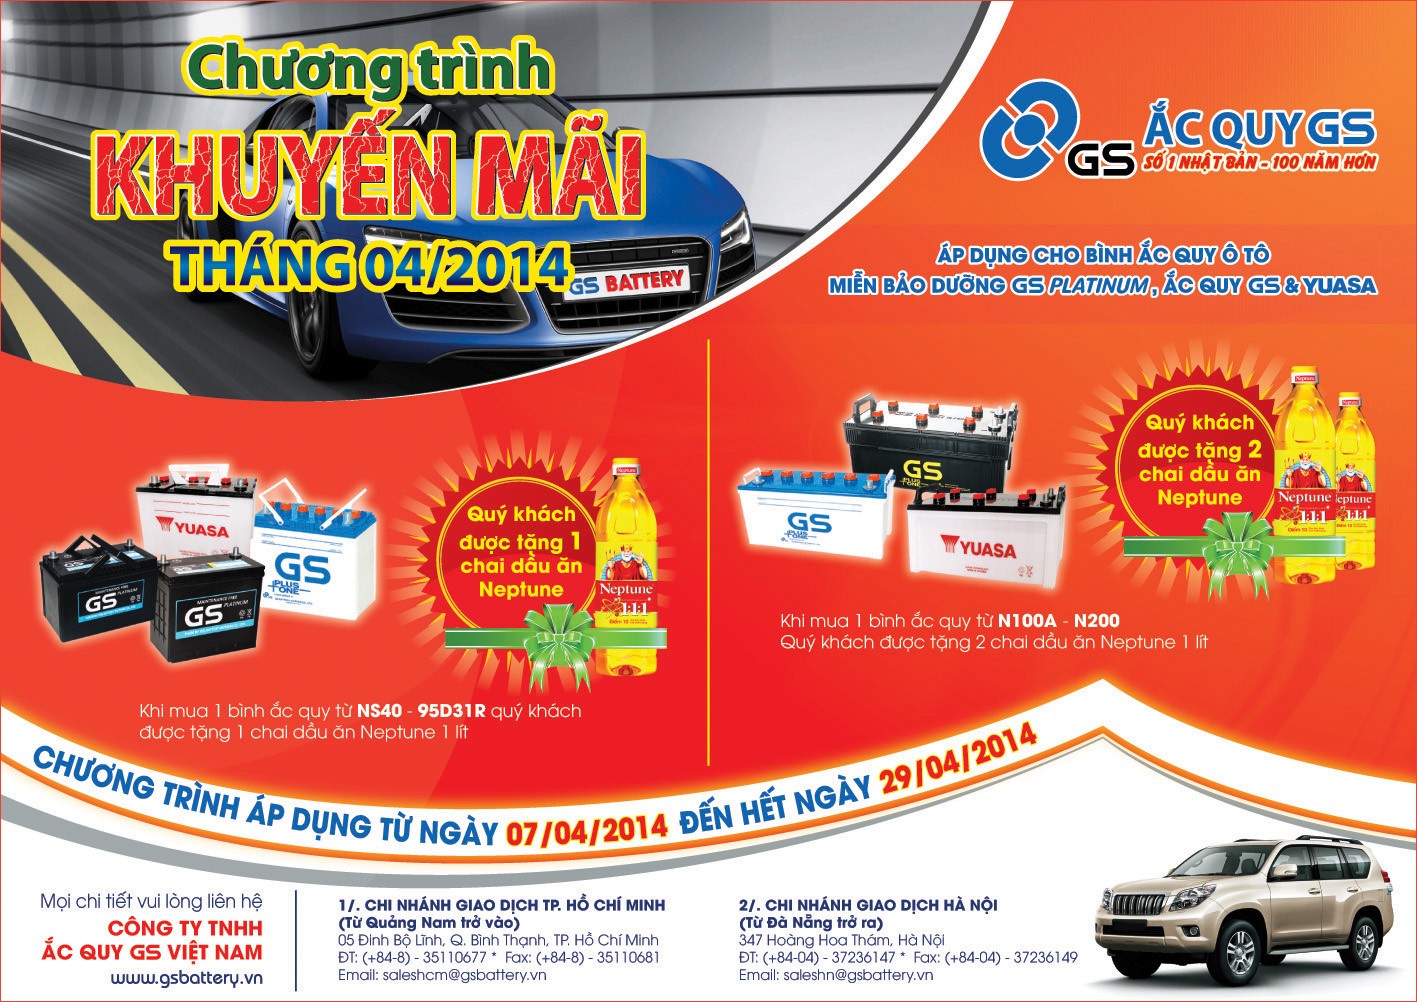 PROMOTION CAMPAIGN OF GS BATTERY IN APR’2014